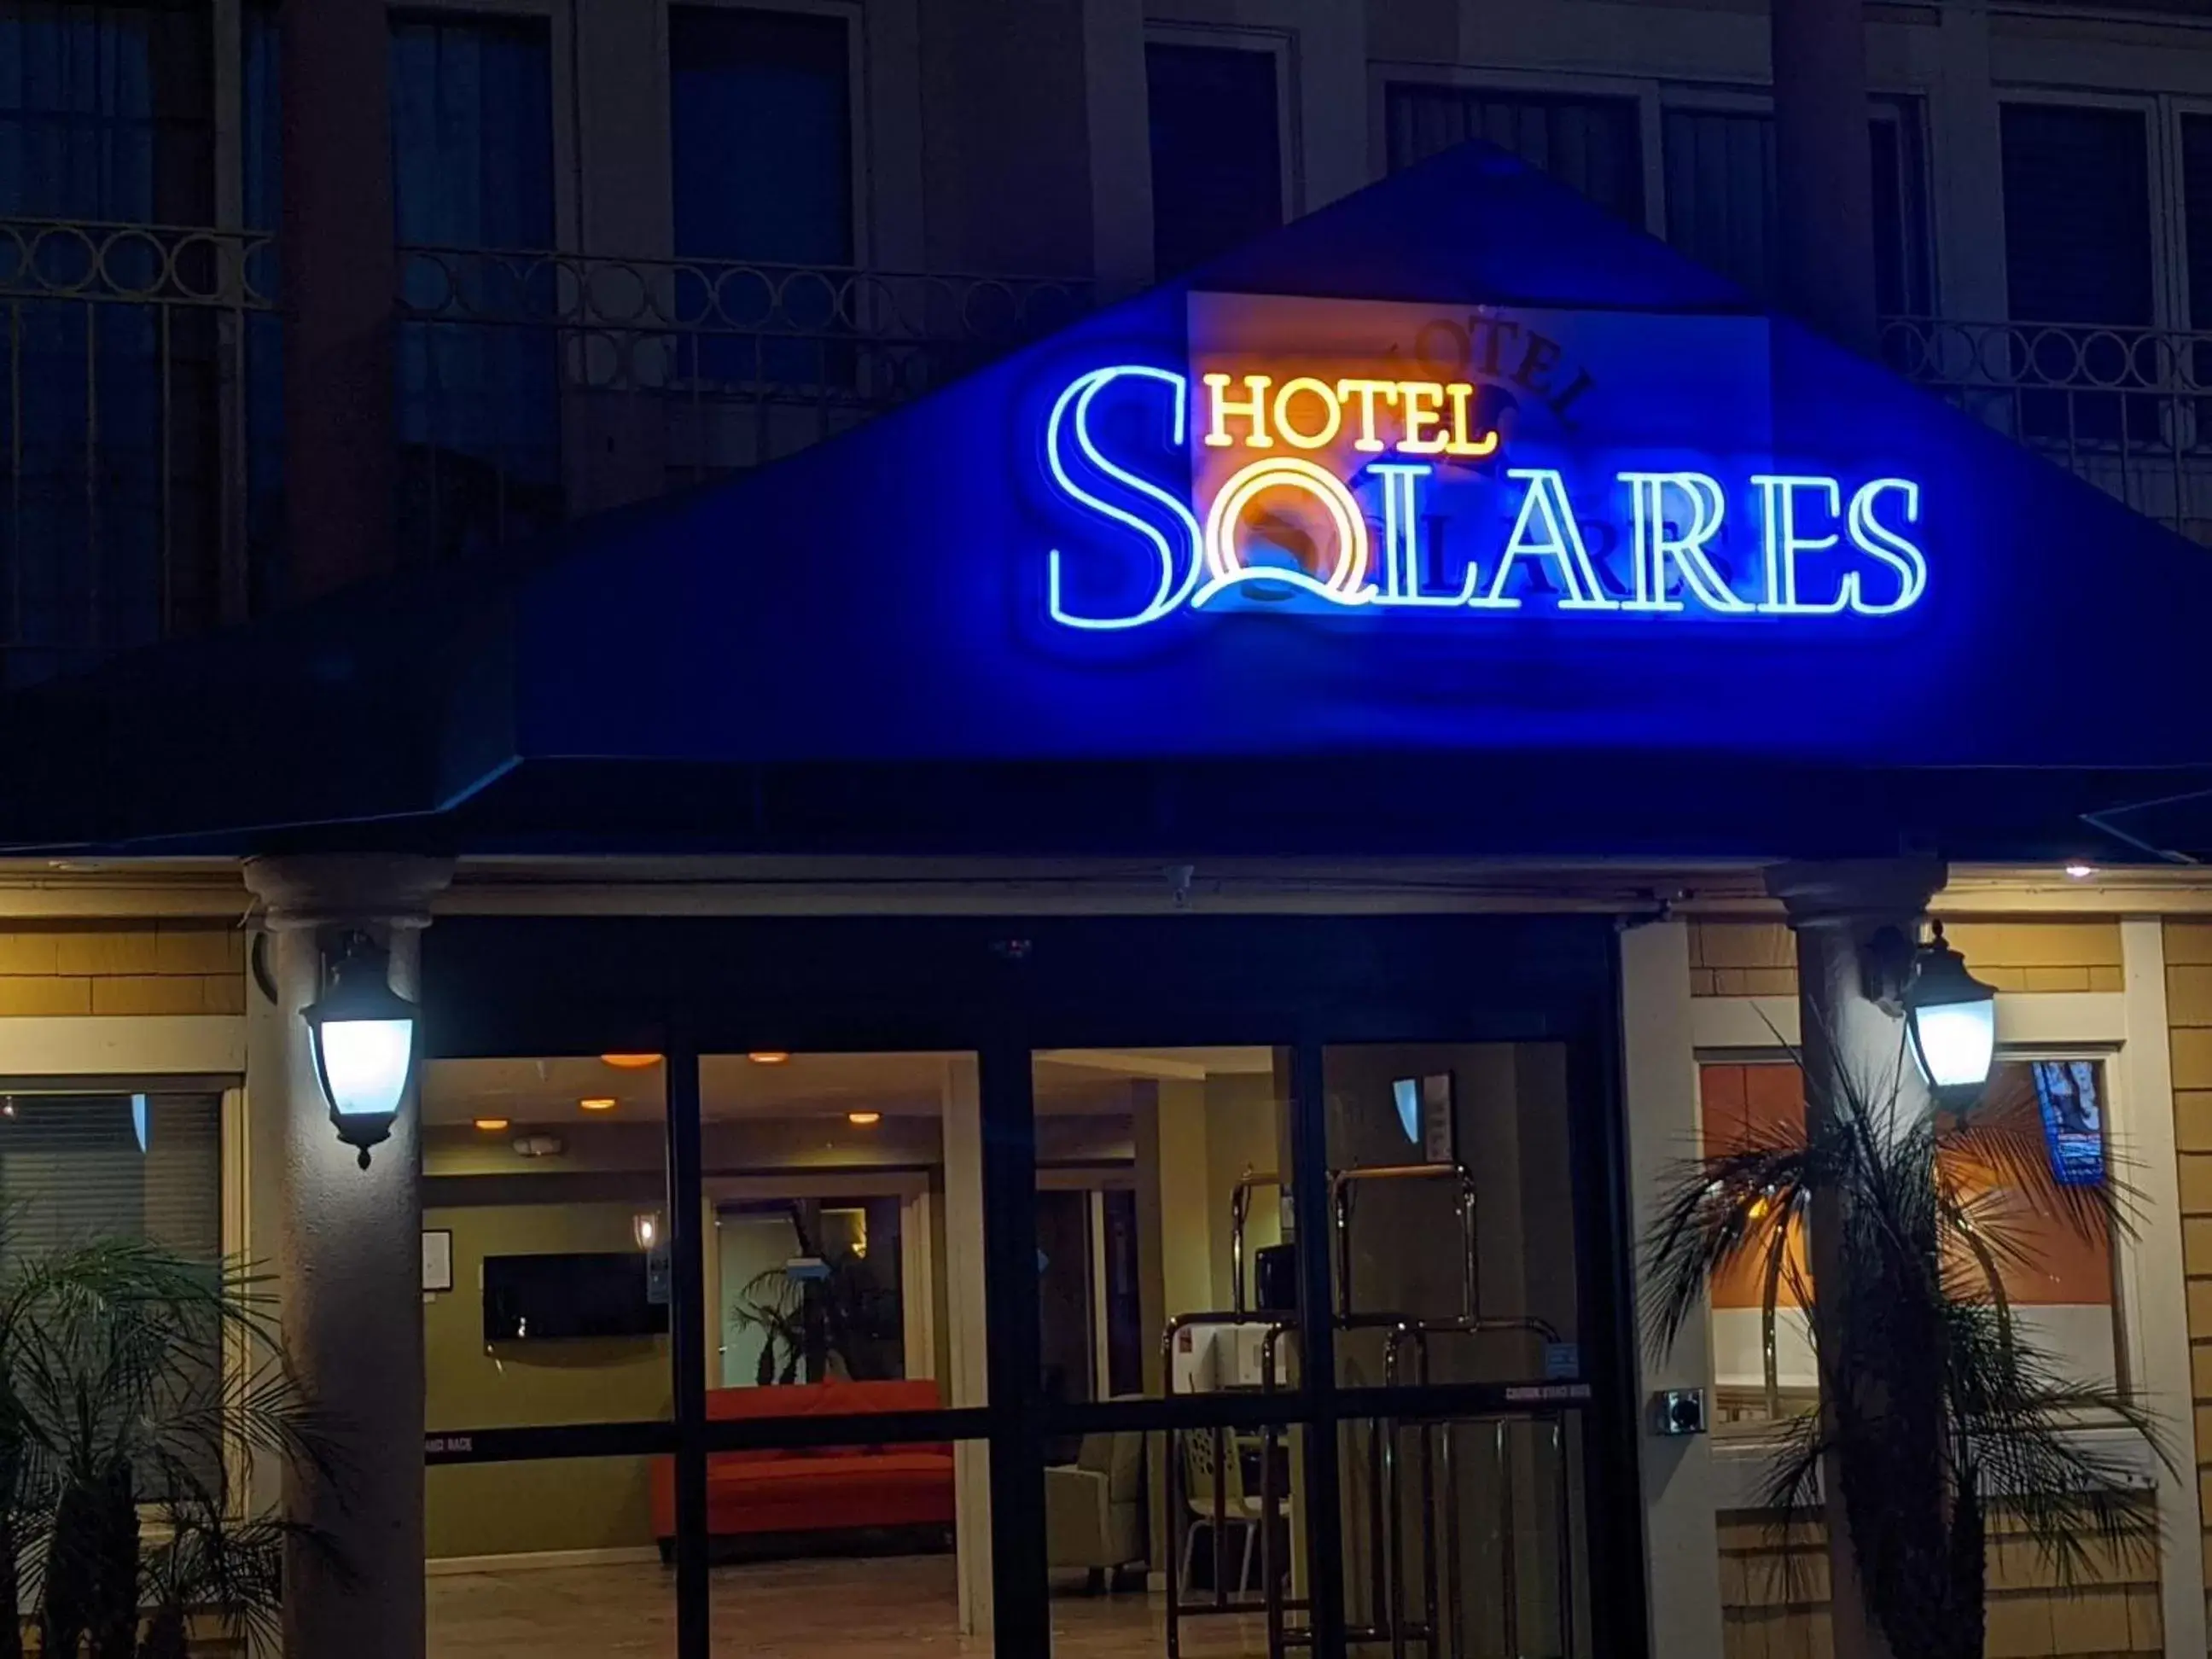 Property Building in Hotel Solares